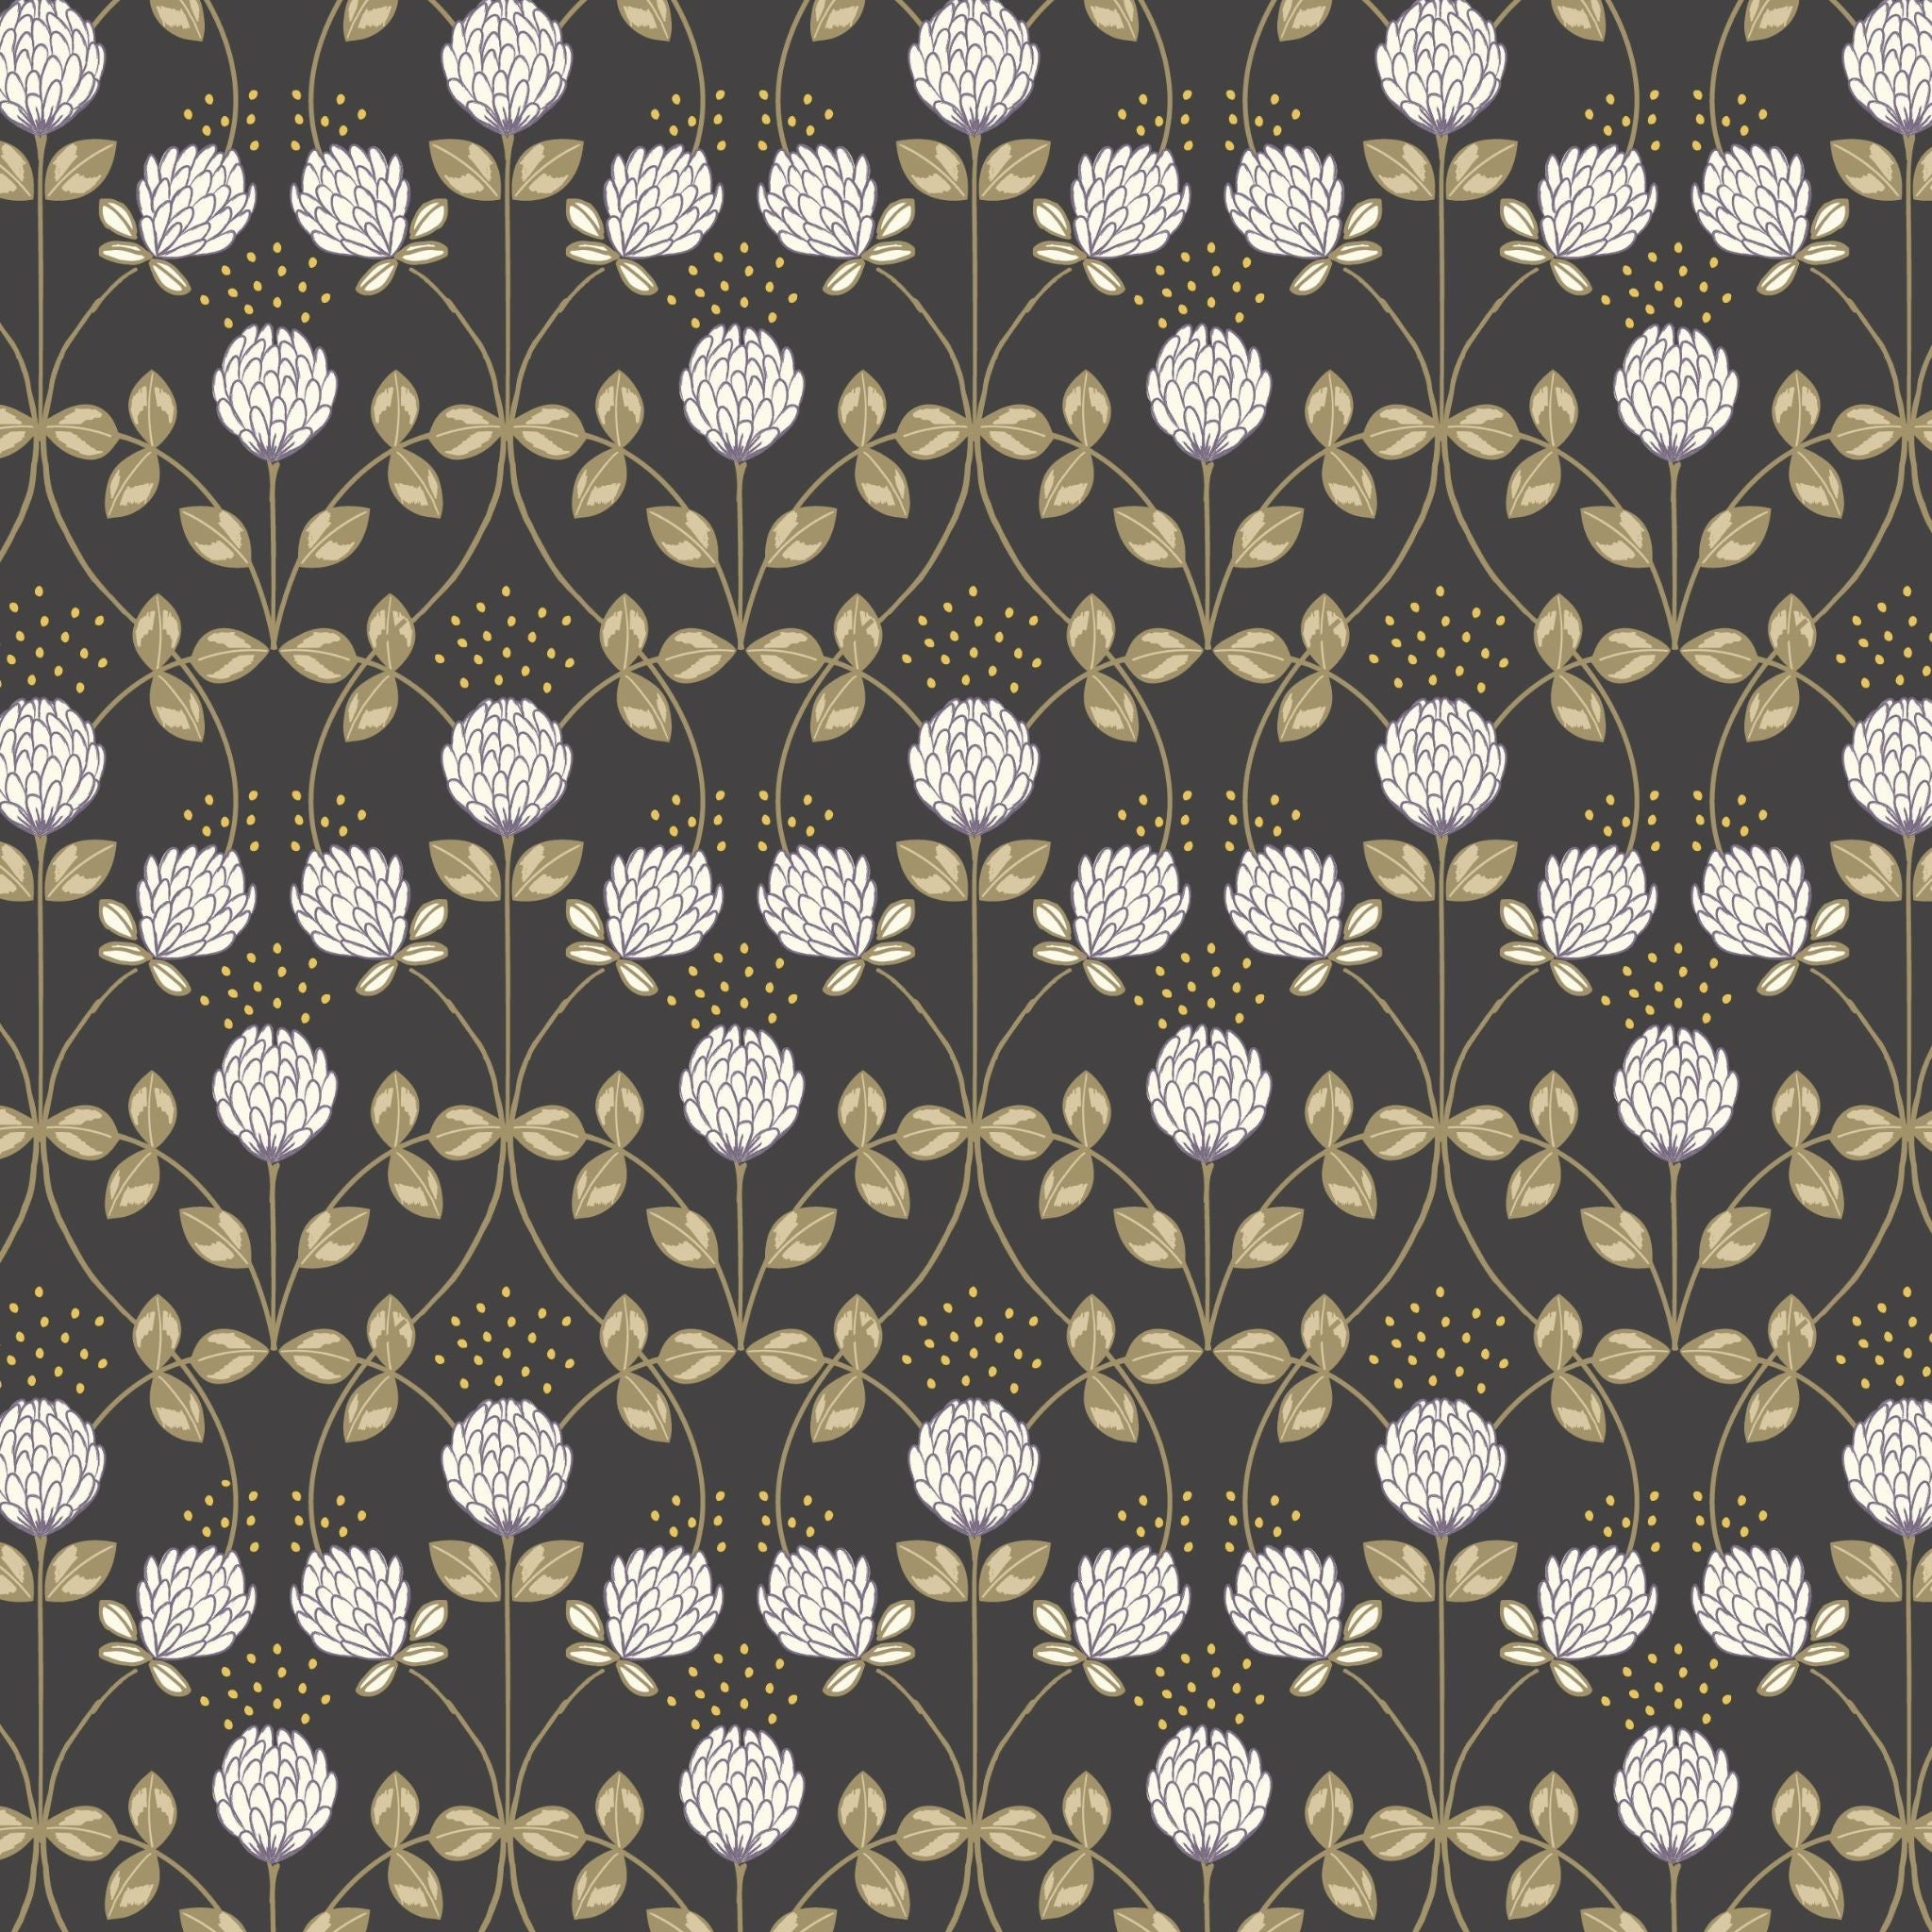 Clover on natural with gold metallic cotton fabric - Honey Bee by Lewis & Irene A653.1